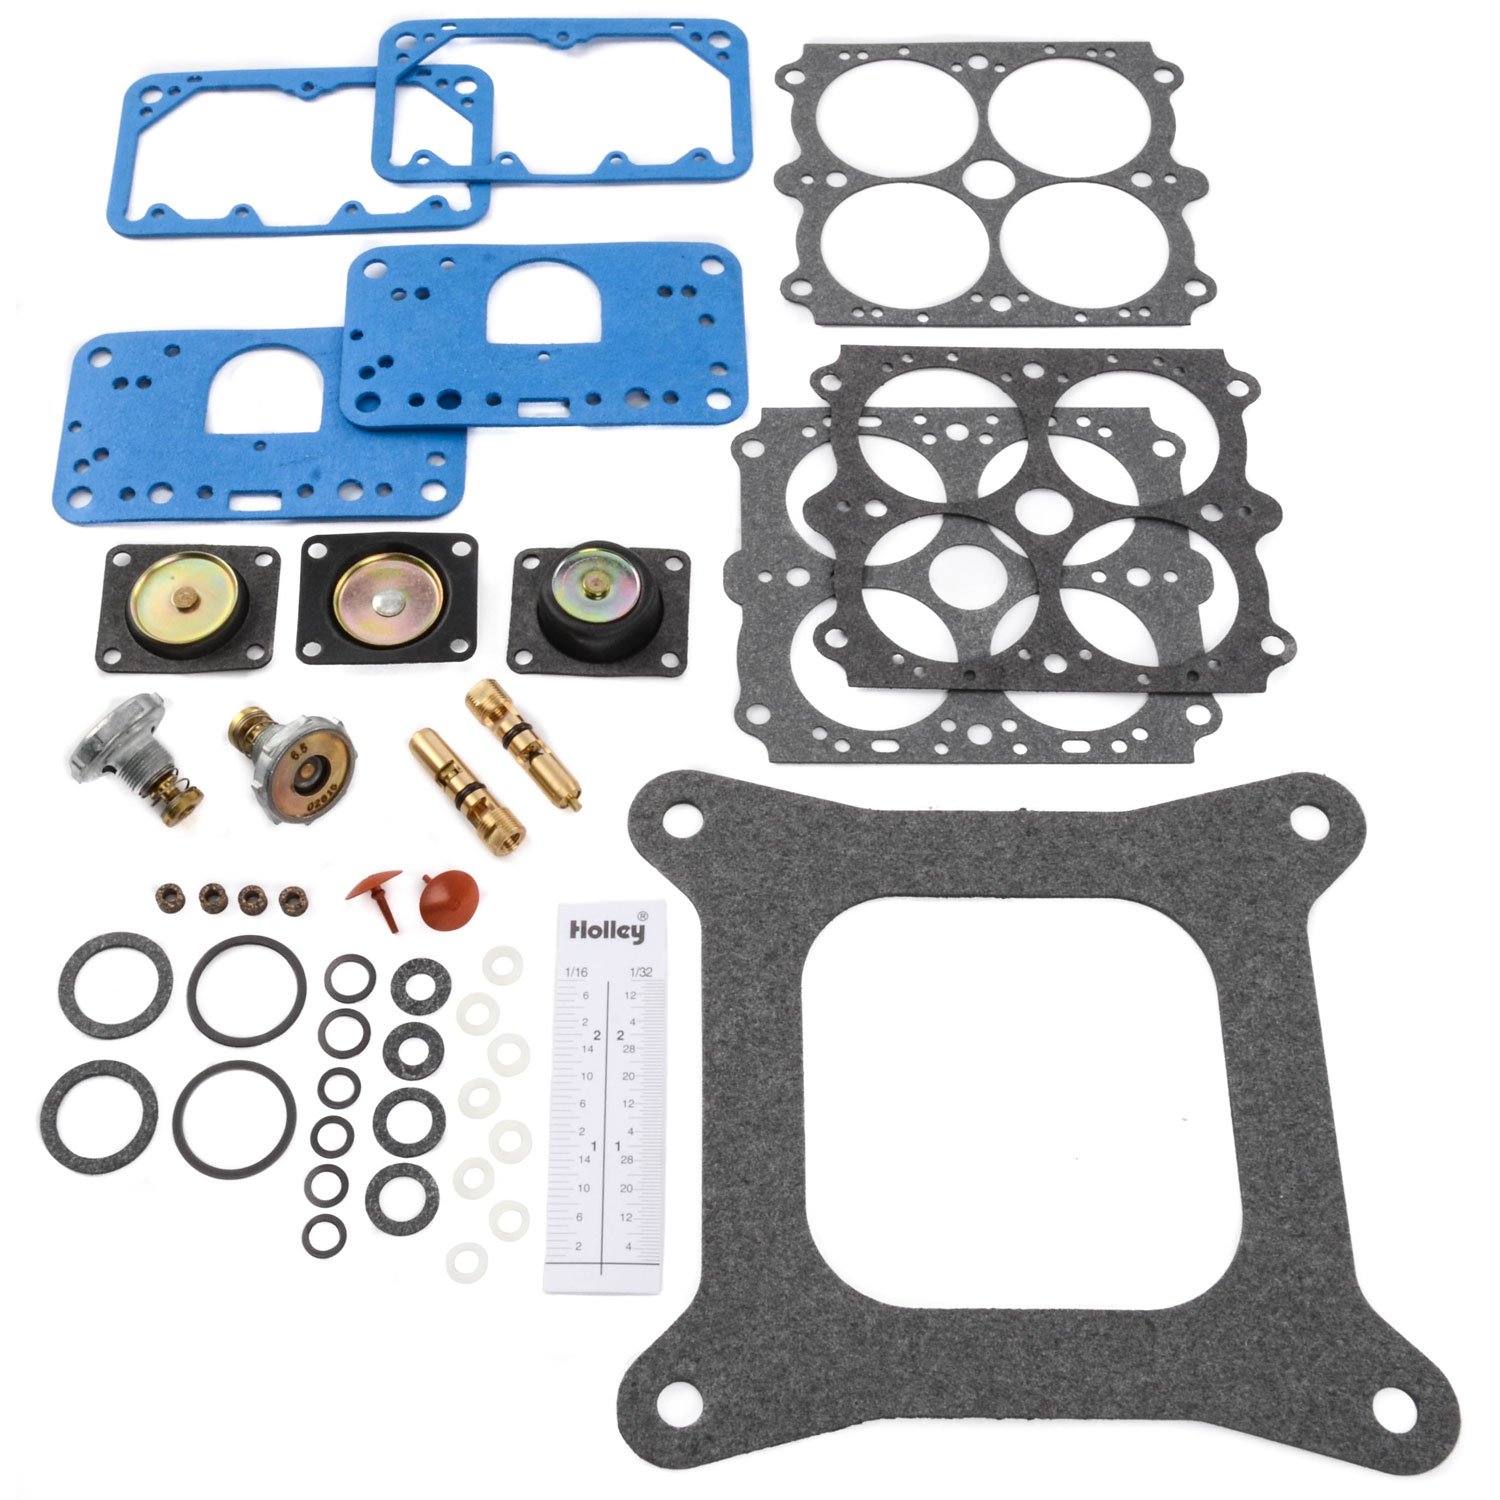 Fast Kit For Holley 4150 Carbs